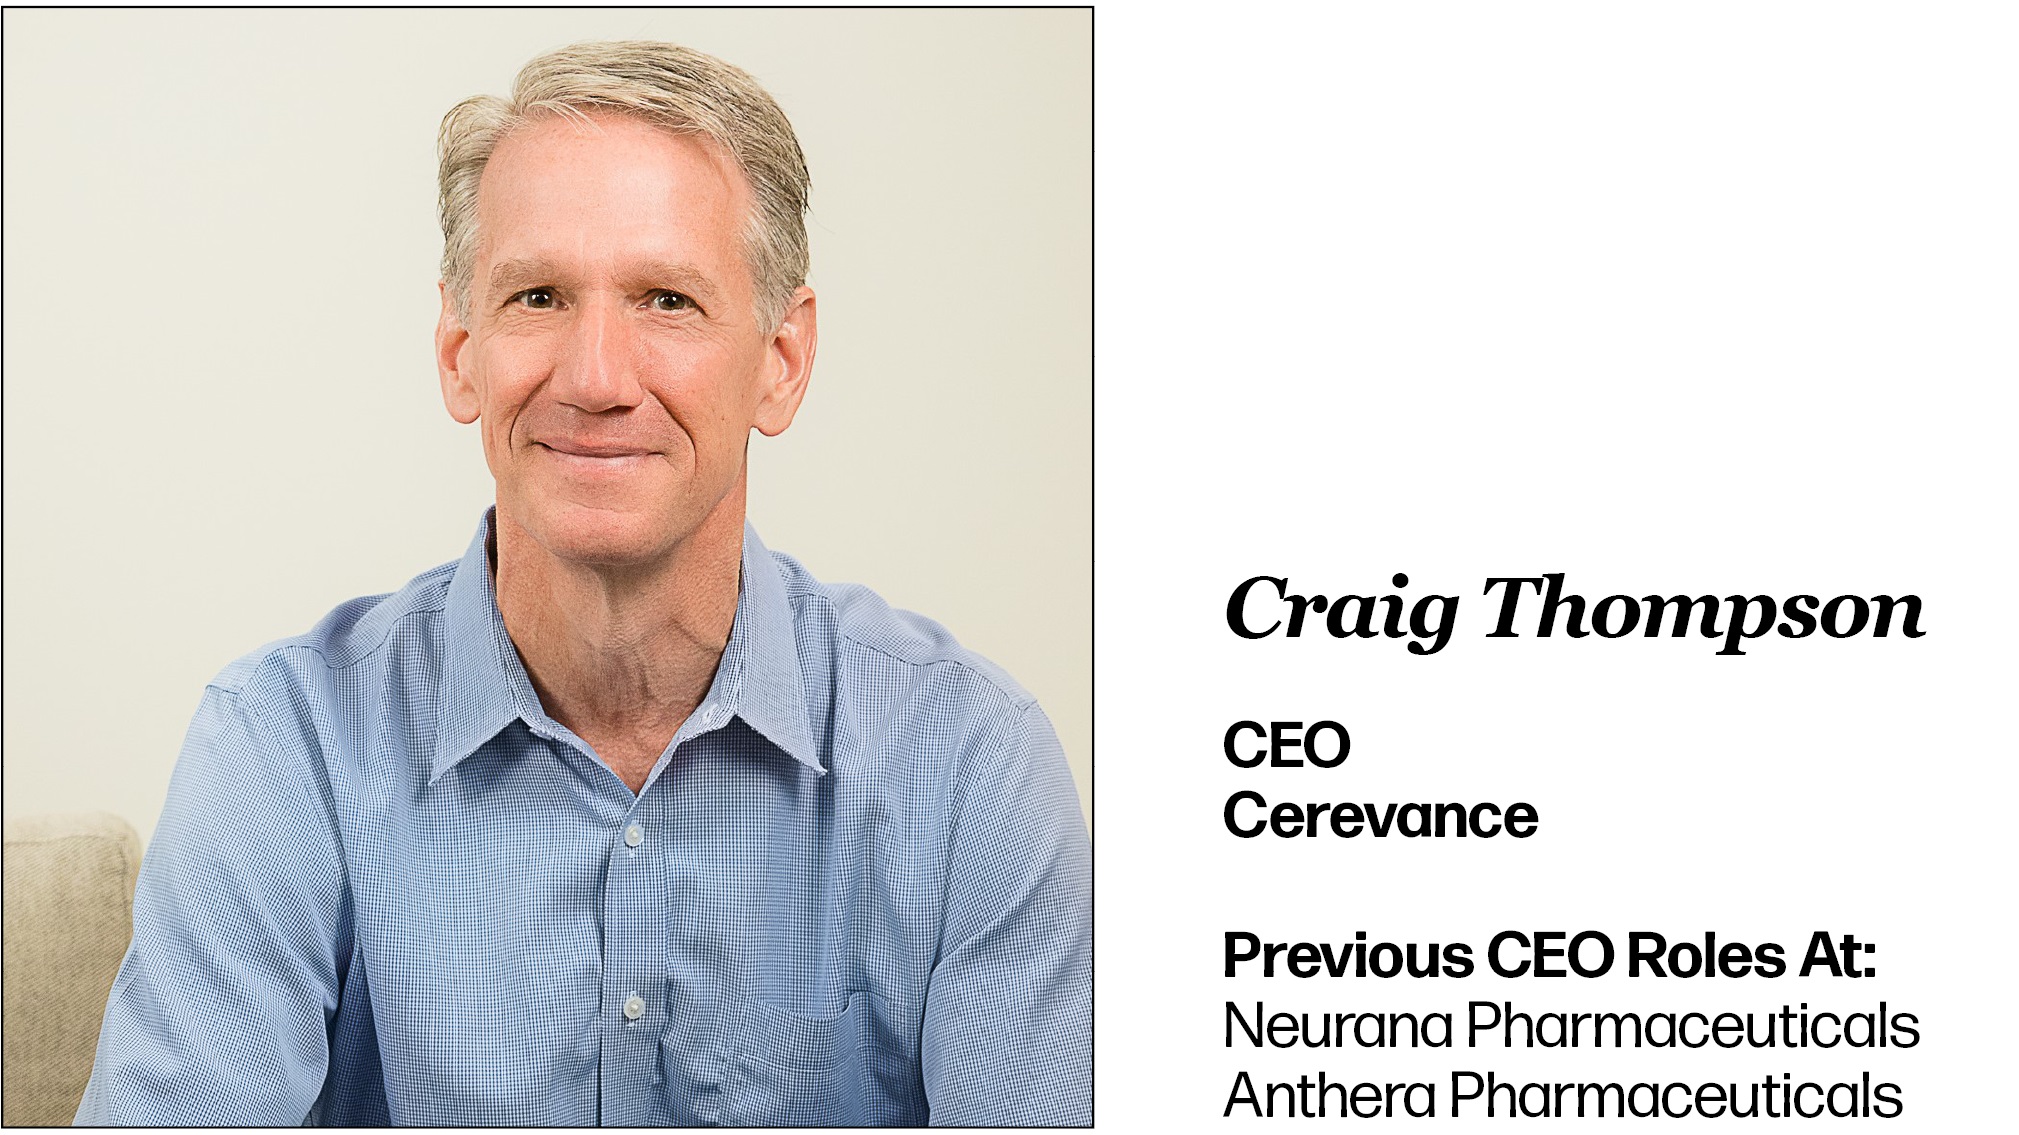 Headshot of Craig Thompson. Lists his current role as CEO of Cerevance. His past CEO roles were at Neurana Pharmaceuticals and Anthera Pharmaceuticals.